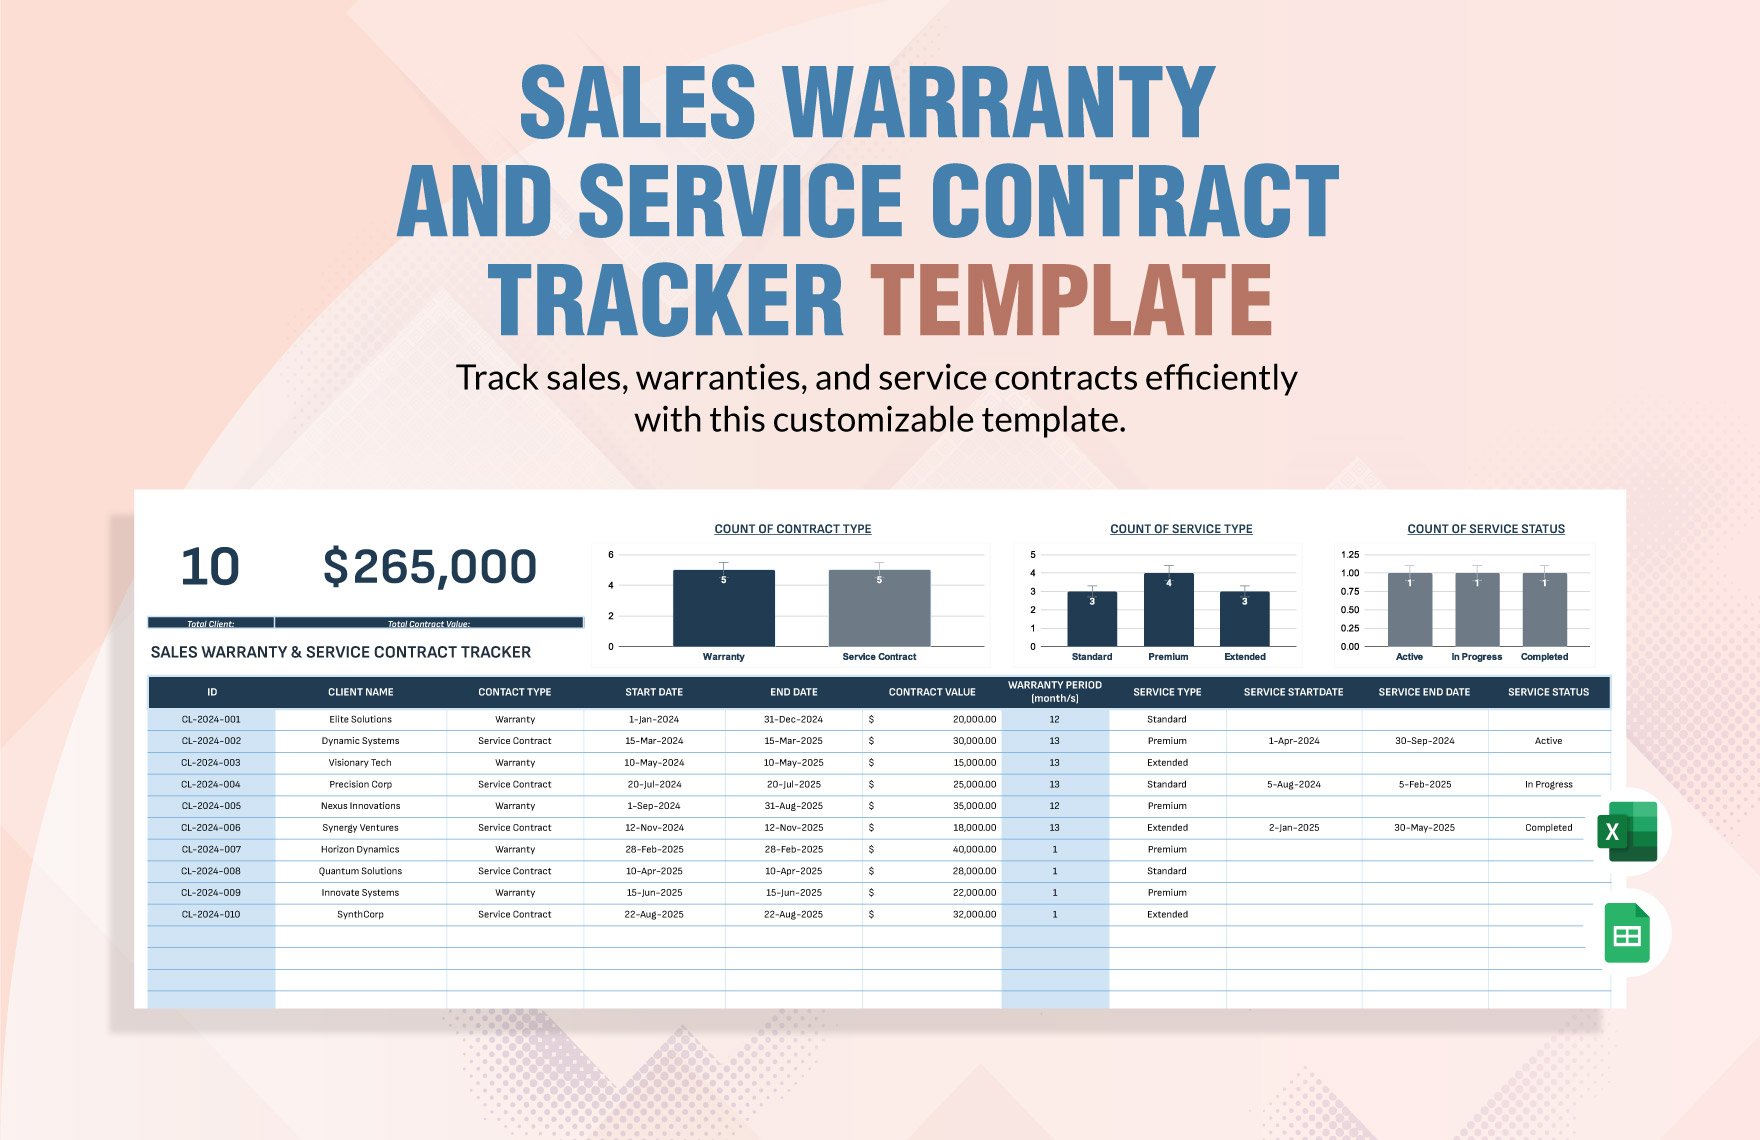 Sales Warranty and Service Contract Tracker Template in Excel, Google Sheets